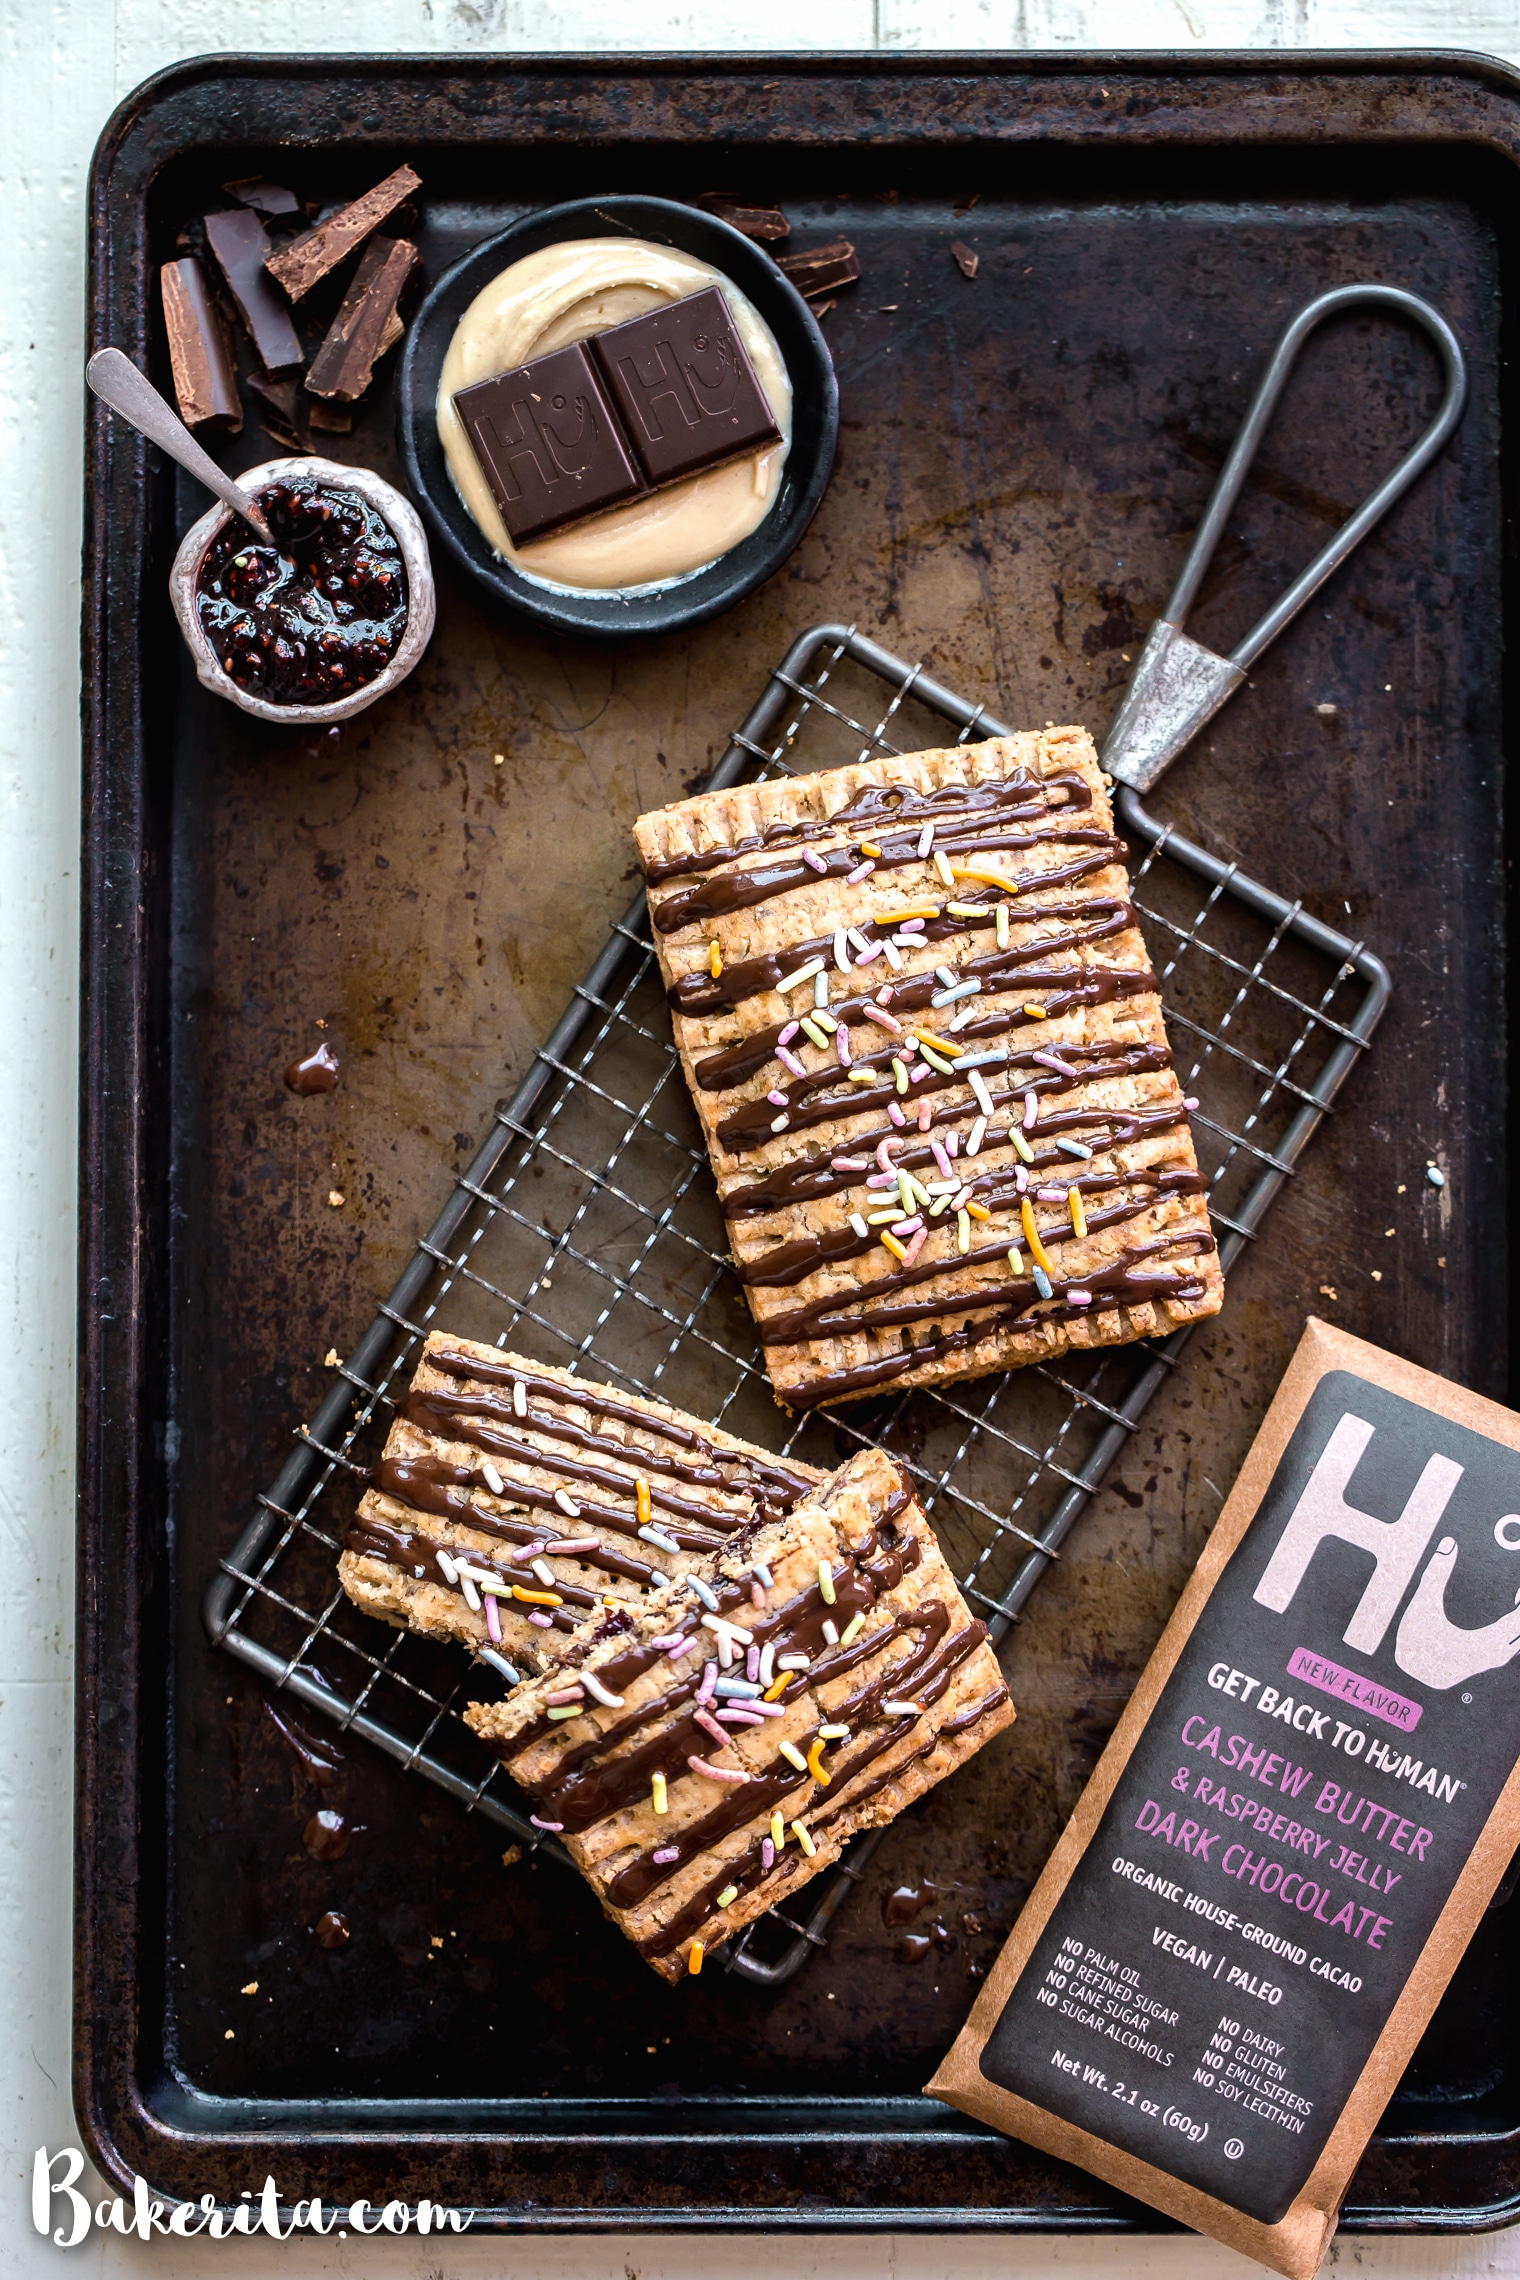 These Chocolate Cashew Butter & Jelly Pop Tarts are made with a flaky vegan and paleo crust and stuffed with cashew butter, raspberry jelly, and chopped Hu Kitchen chocolate. You’re going to go nuts for these paleo & vegan copycat of your favorite childhood treat!